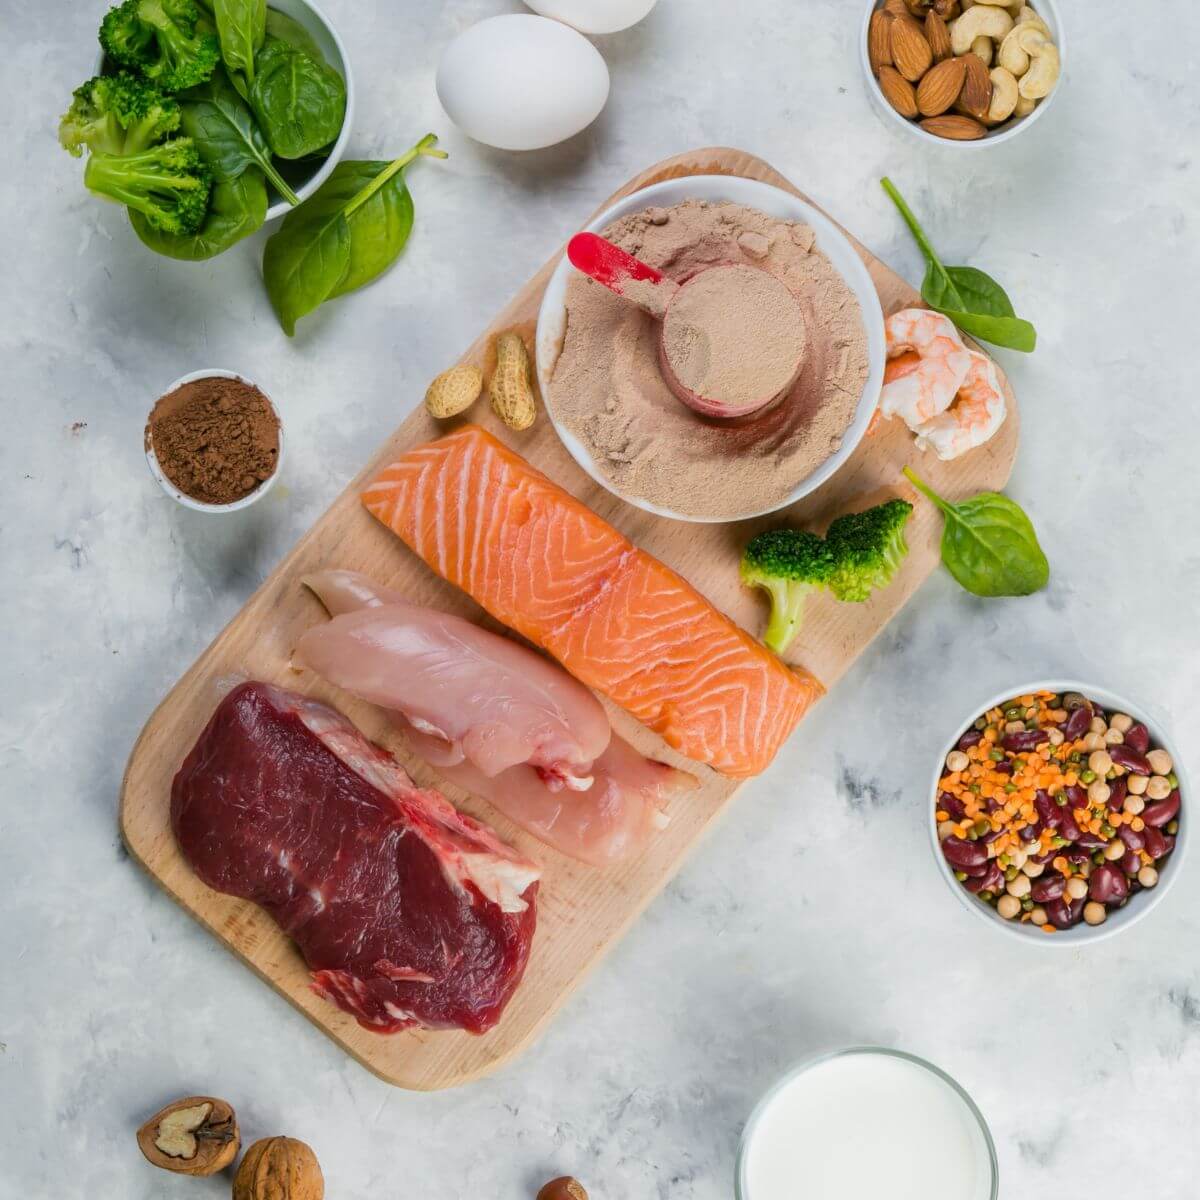 why is protein important for nutrition?